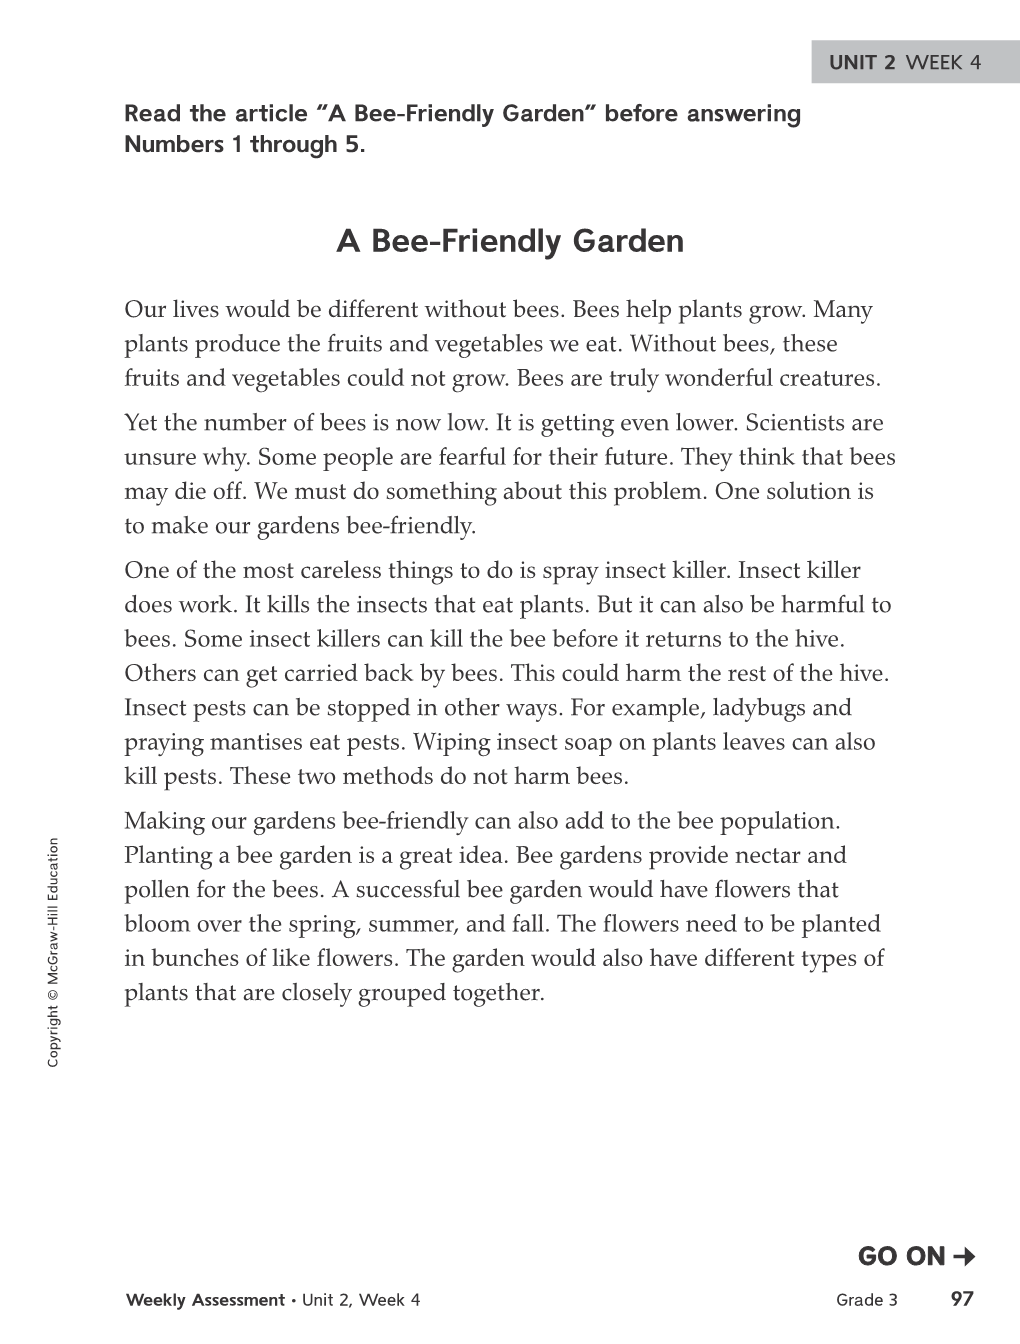 A Bee-Friendly Garden” Before Answering Numbers 1 Through 5